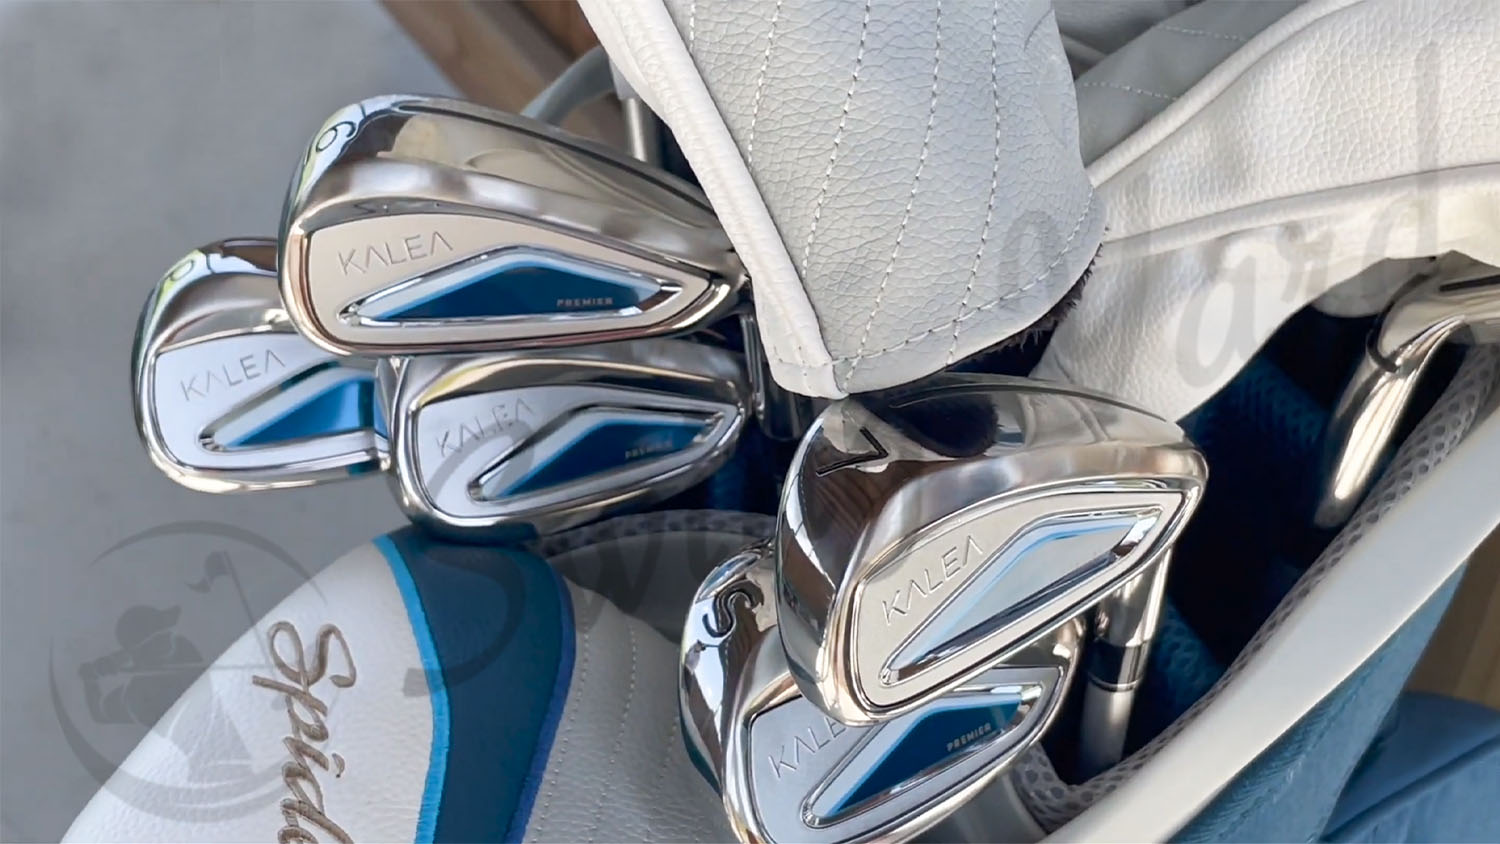 A full set of TaylorMade Kalea Premier irons I got in the golf course